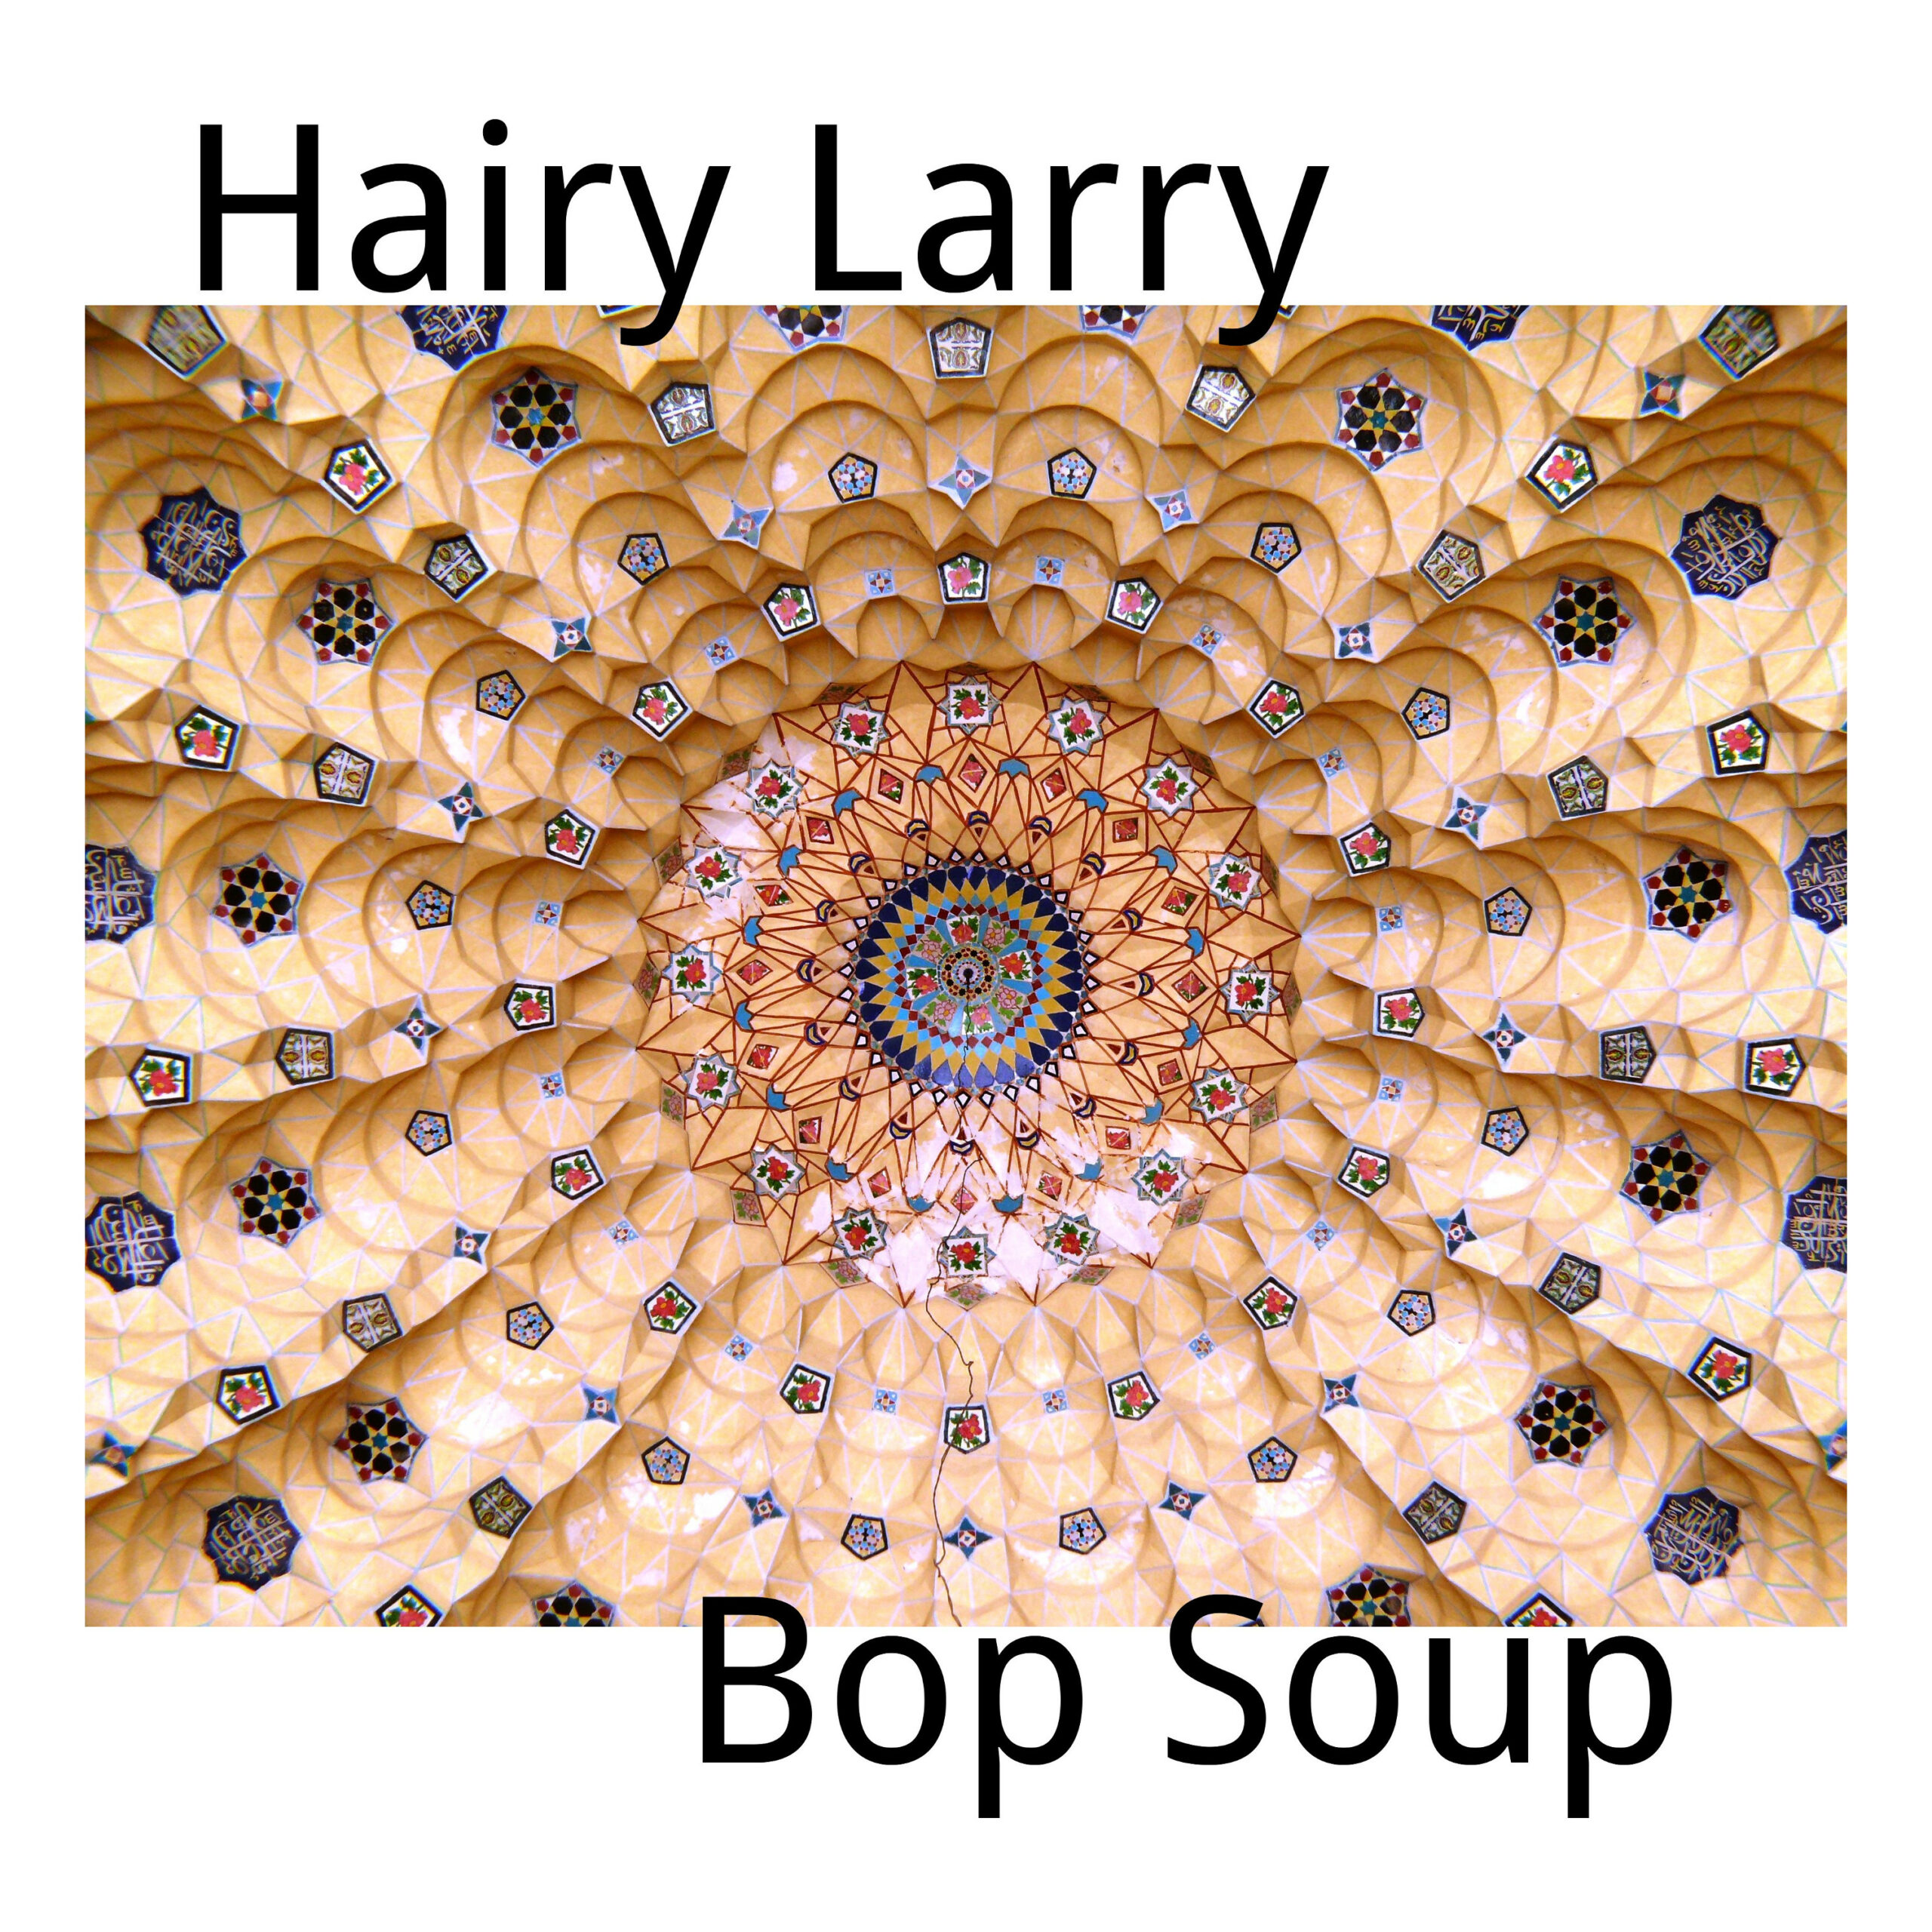 Read more about the article Bop Soup